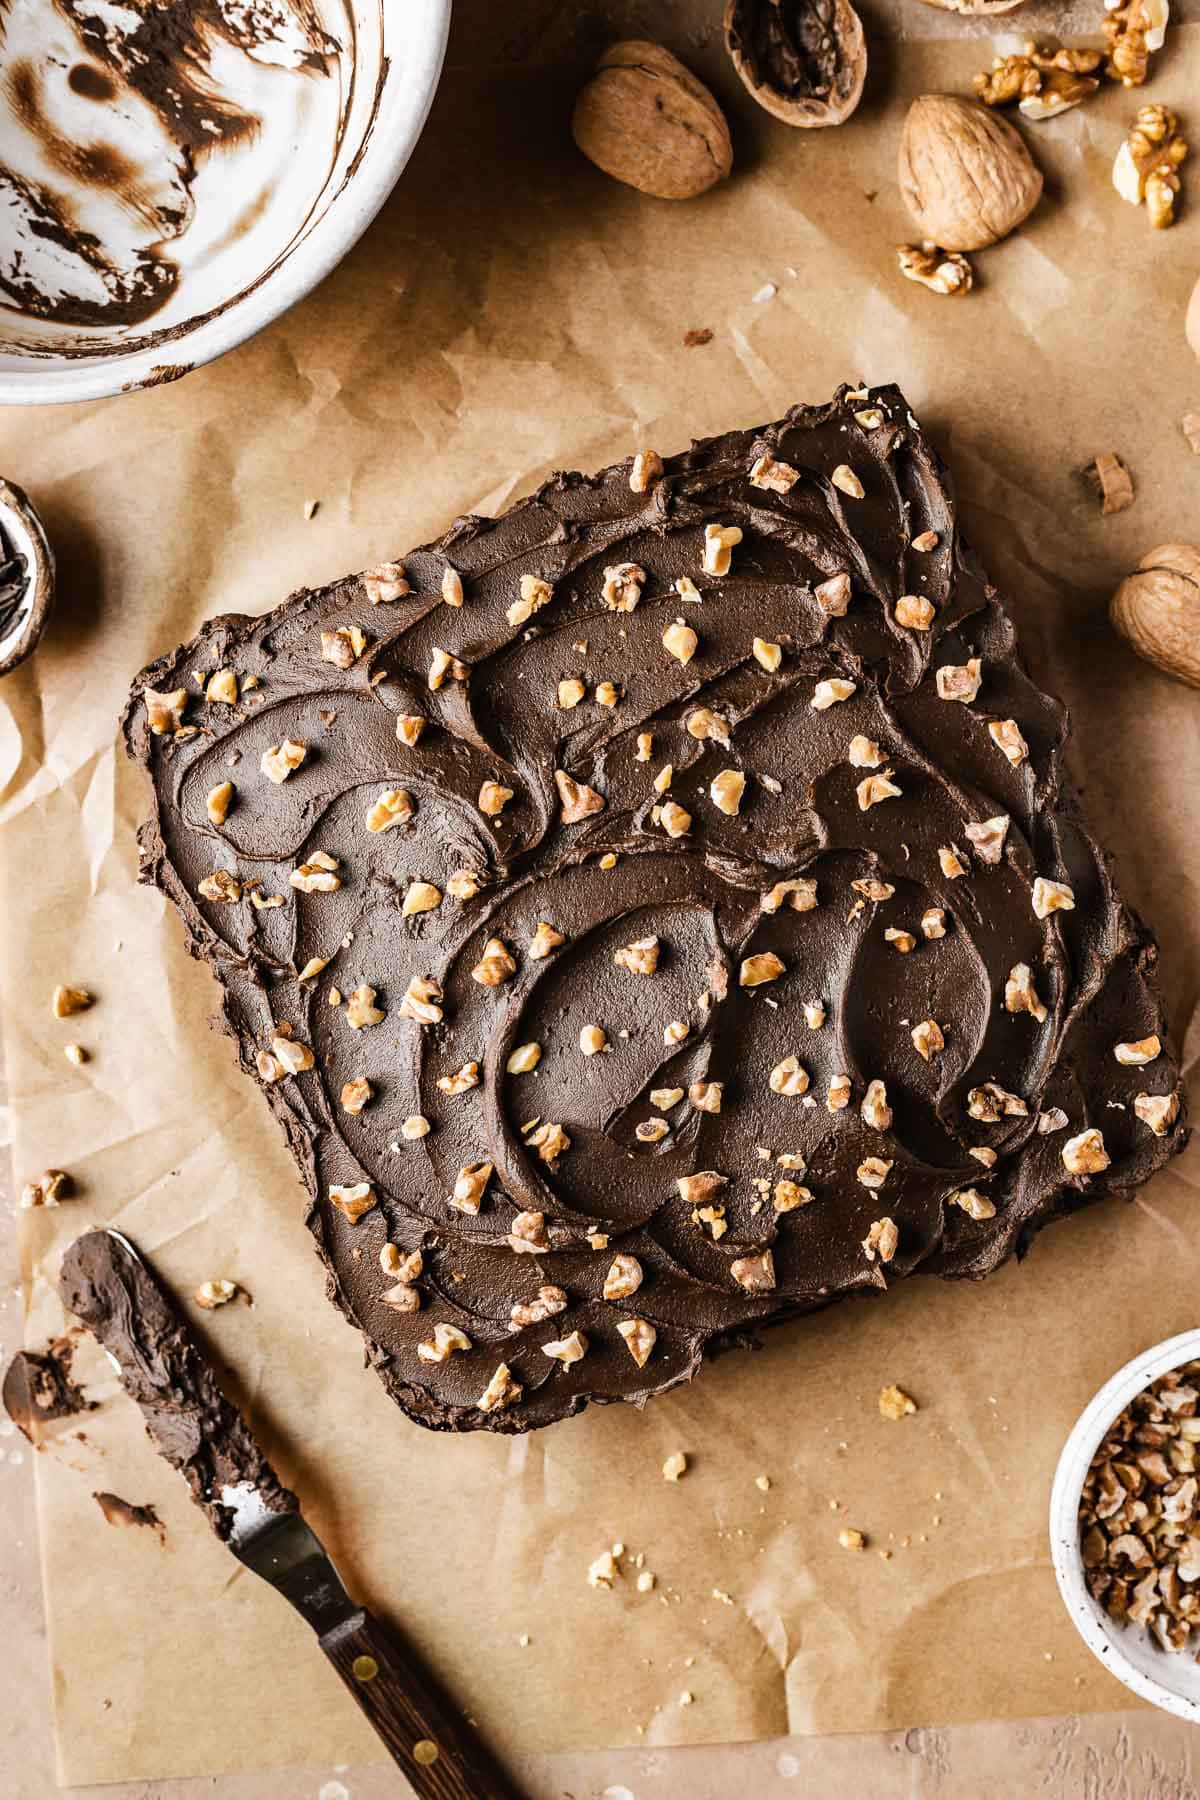 A chocolate walnut cake on brown parchment paper surrounded by white ceramic prep bowls, cracked walnuts and a ganache coated spatula.